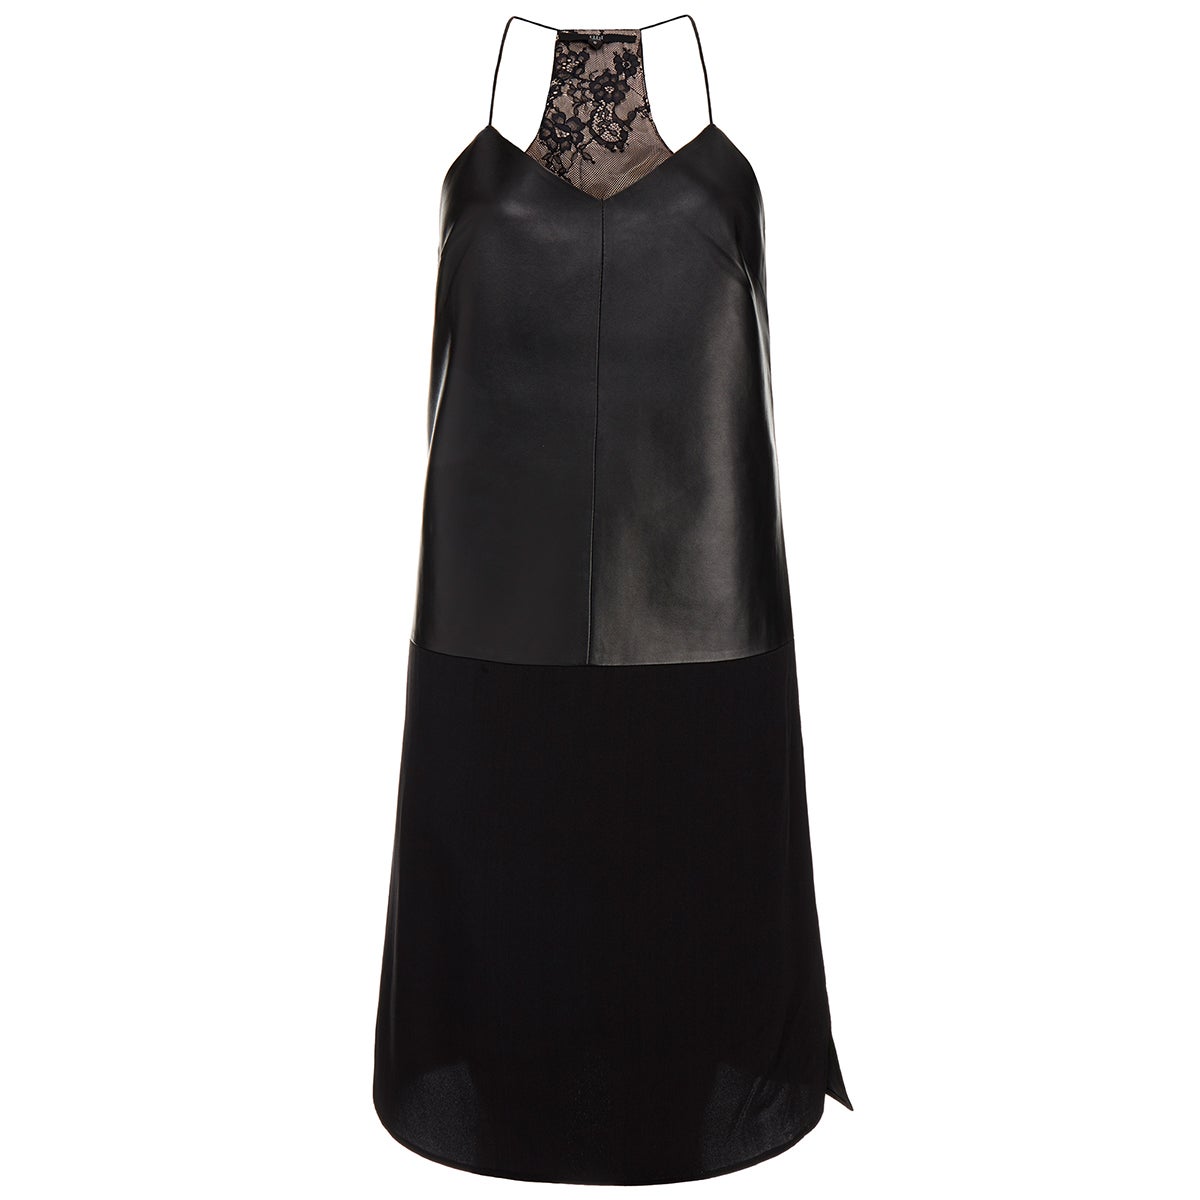 One Trend, Three Ways: A Chic, Sexy and Edgy way to Rock a Slip Dress